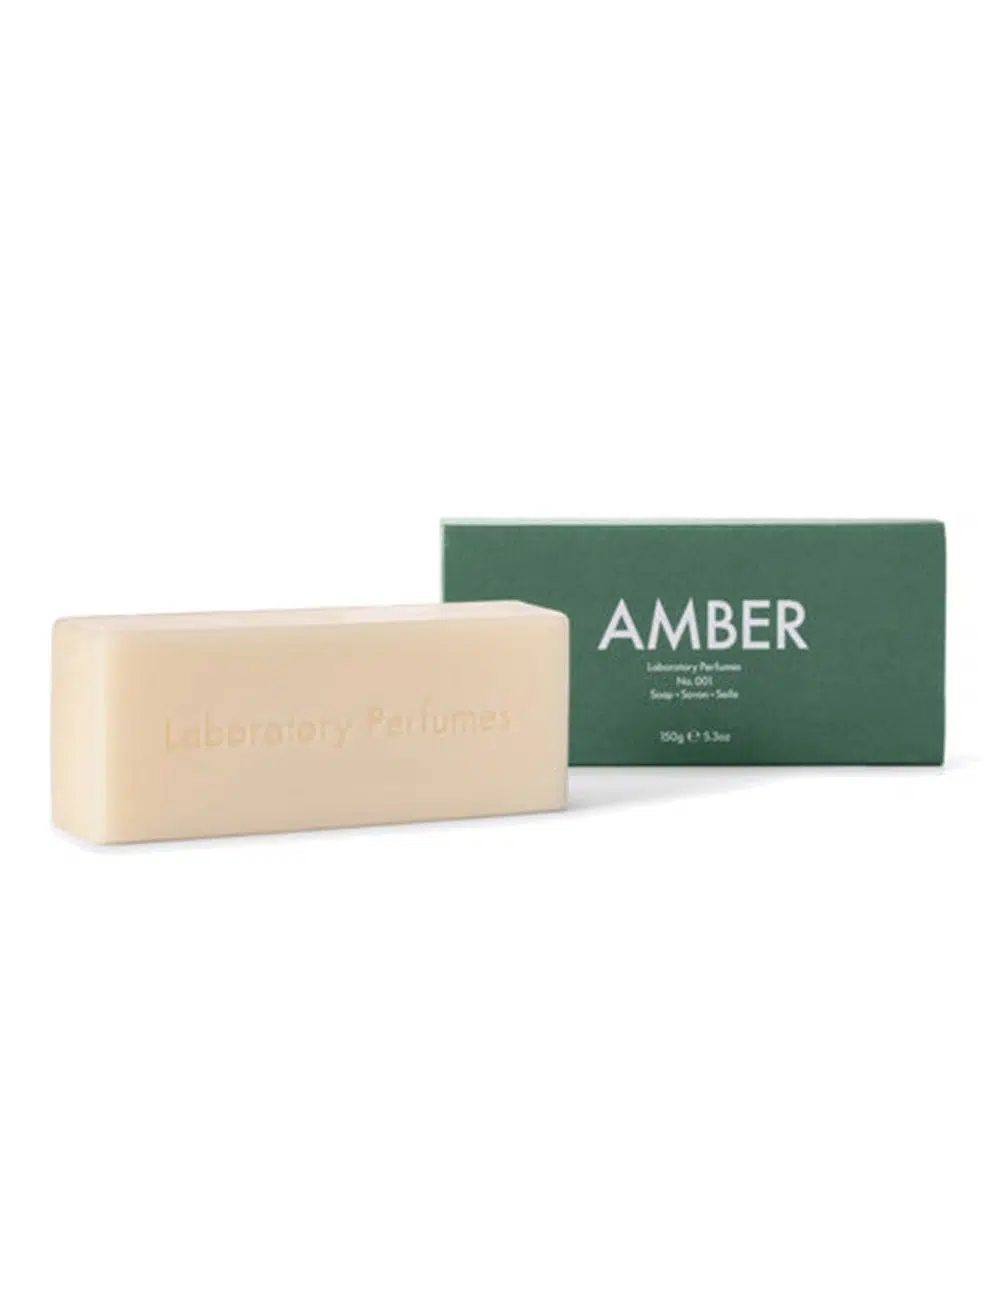 Eco-Luxurious Amber Soap